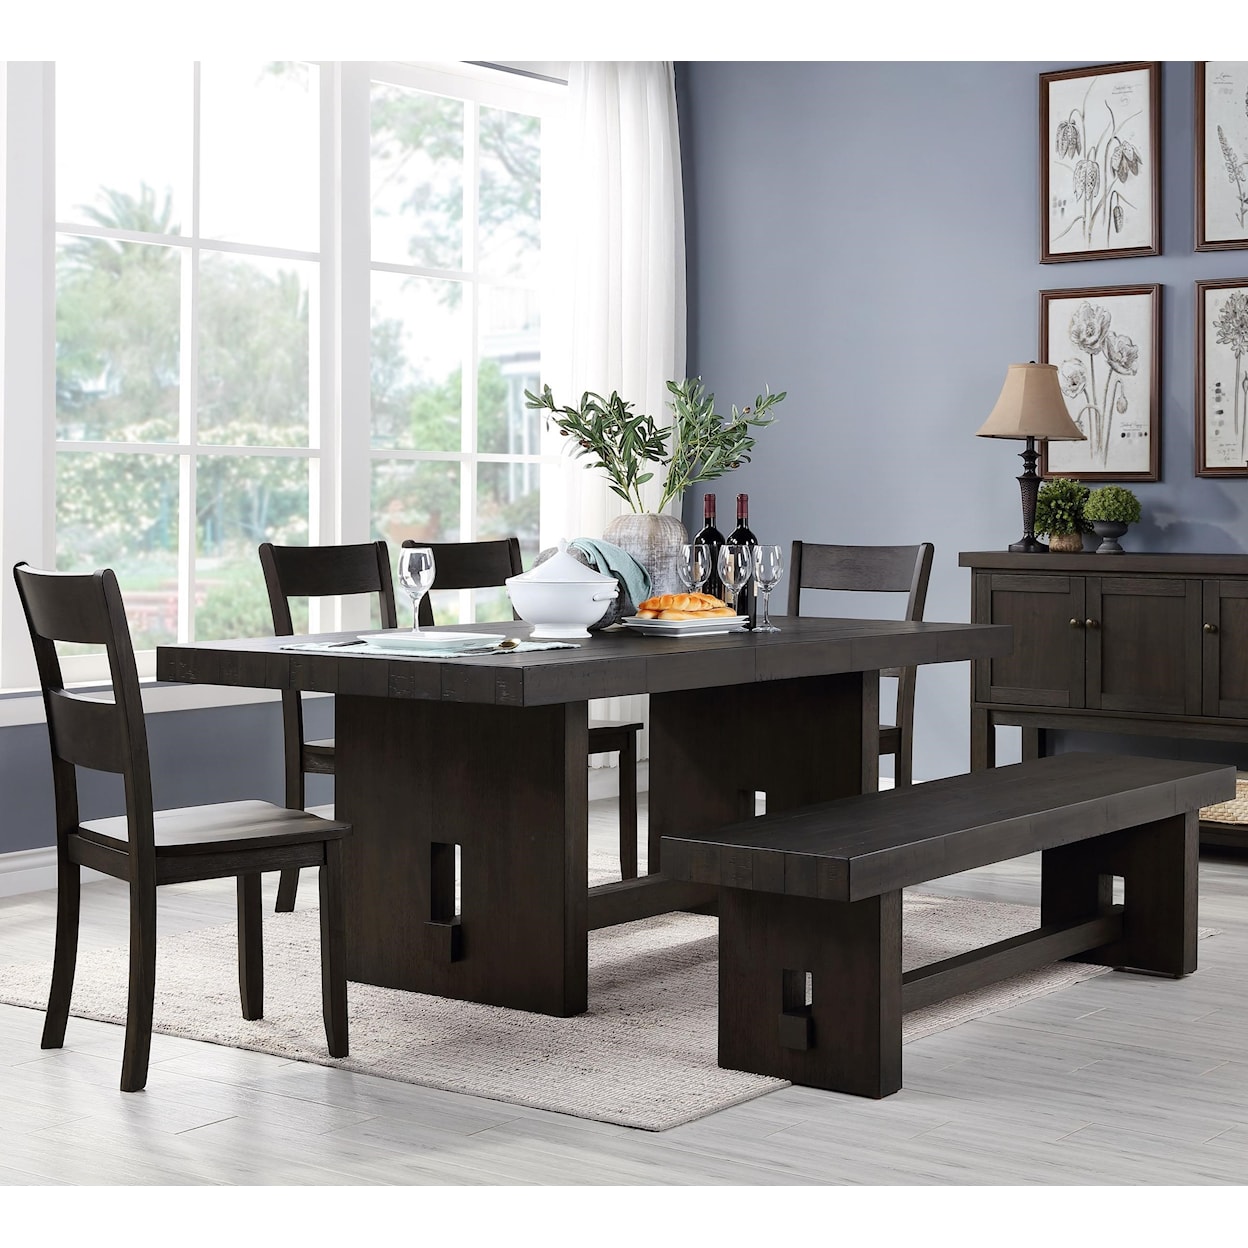 Acme Furniture Haddie Table and Chair Set with Bench